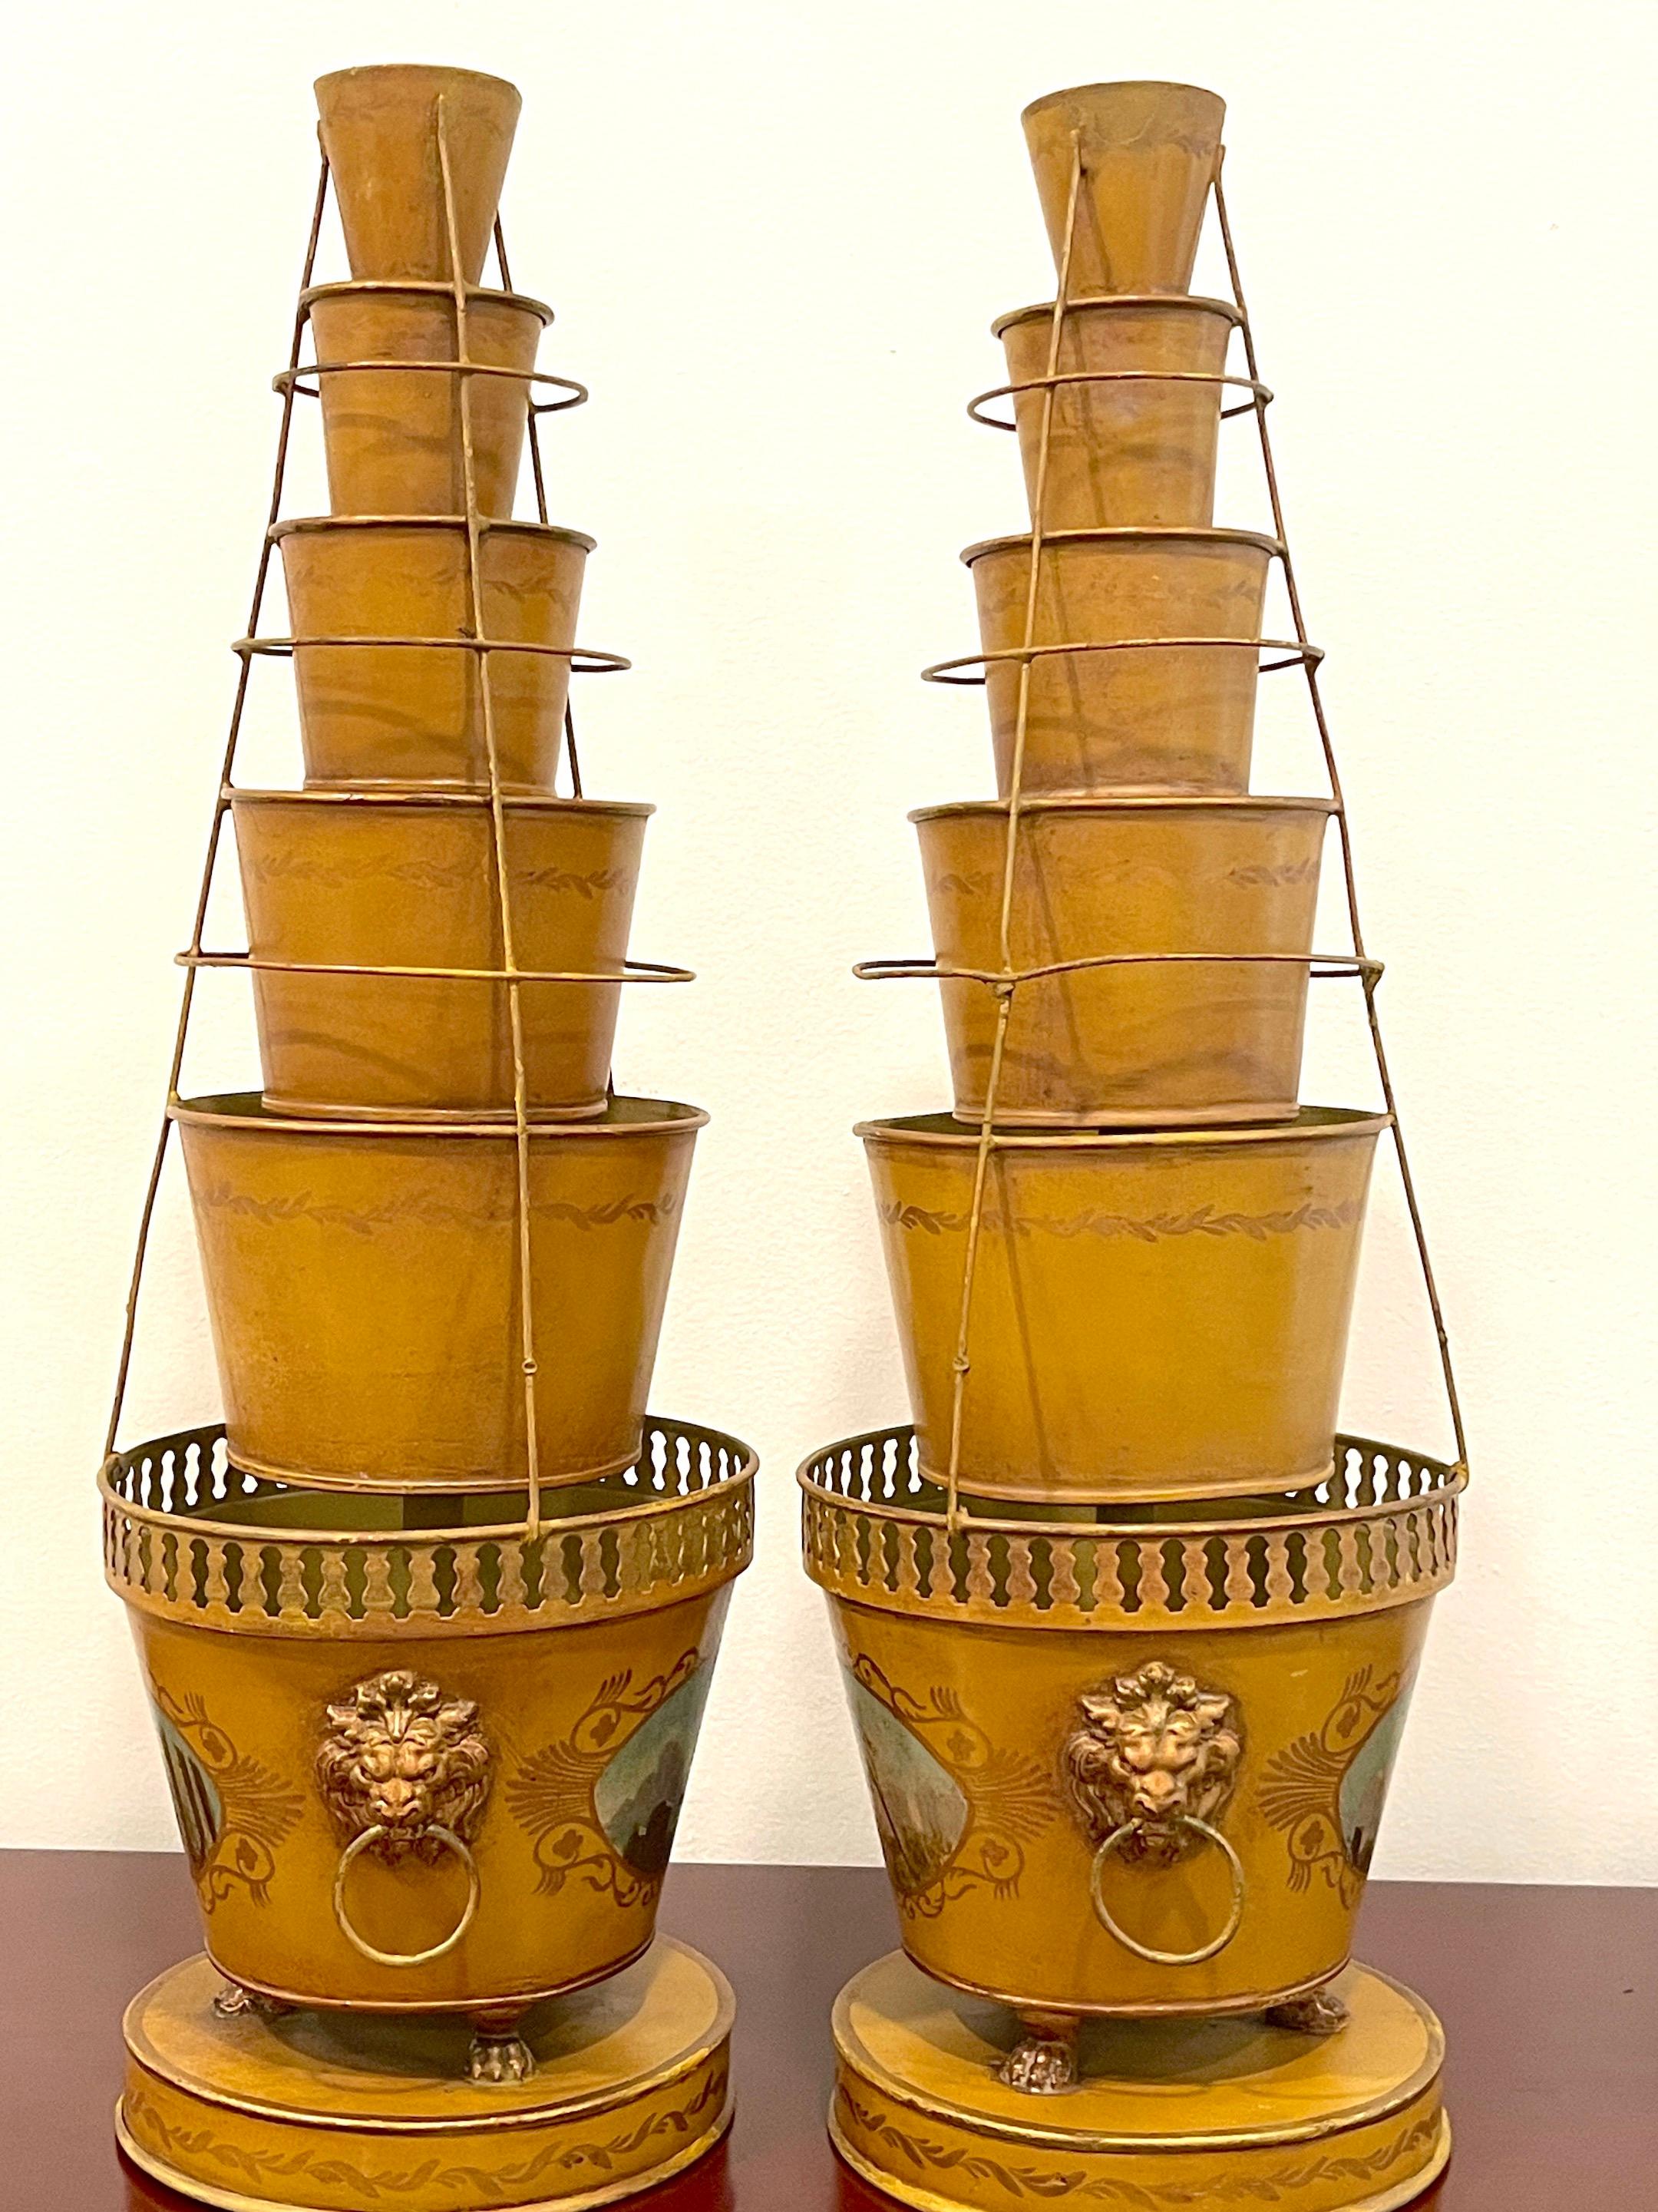 20th Century Pair of Antique French Tole Neoclassical Cachepots/Tulipieres